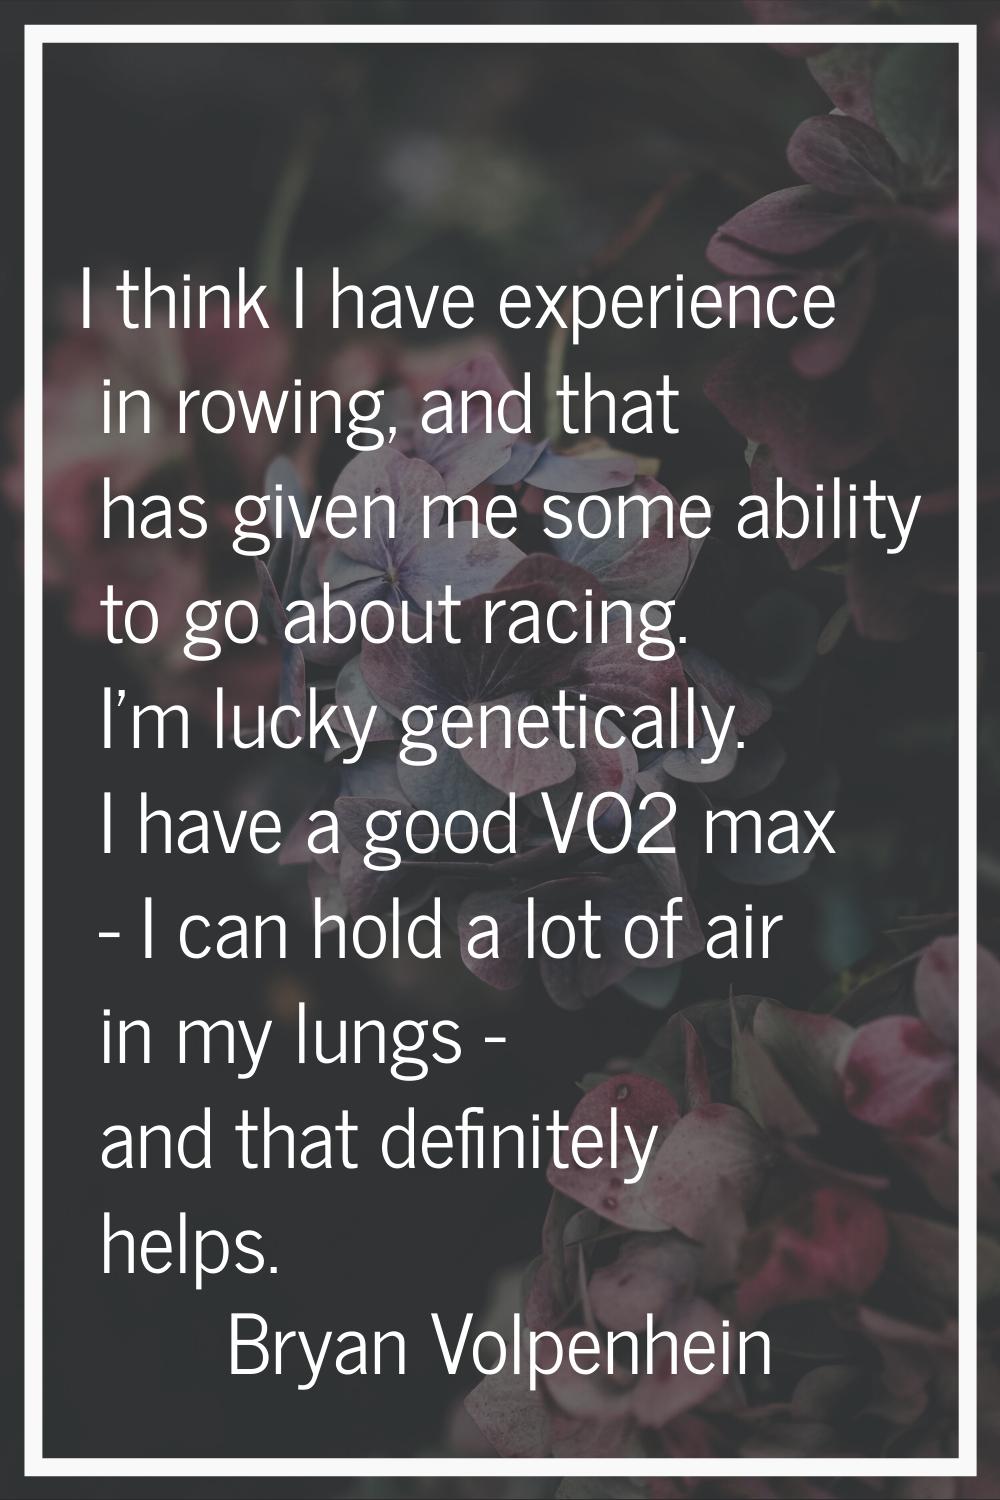 I think I have experience in rowing, and that has given me some ability to go about racing. I'm luc